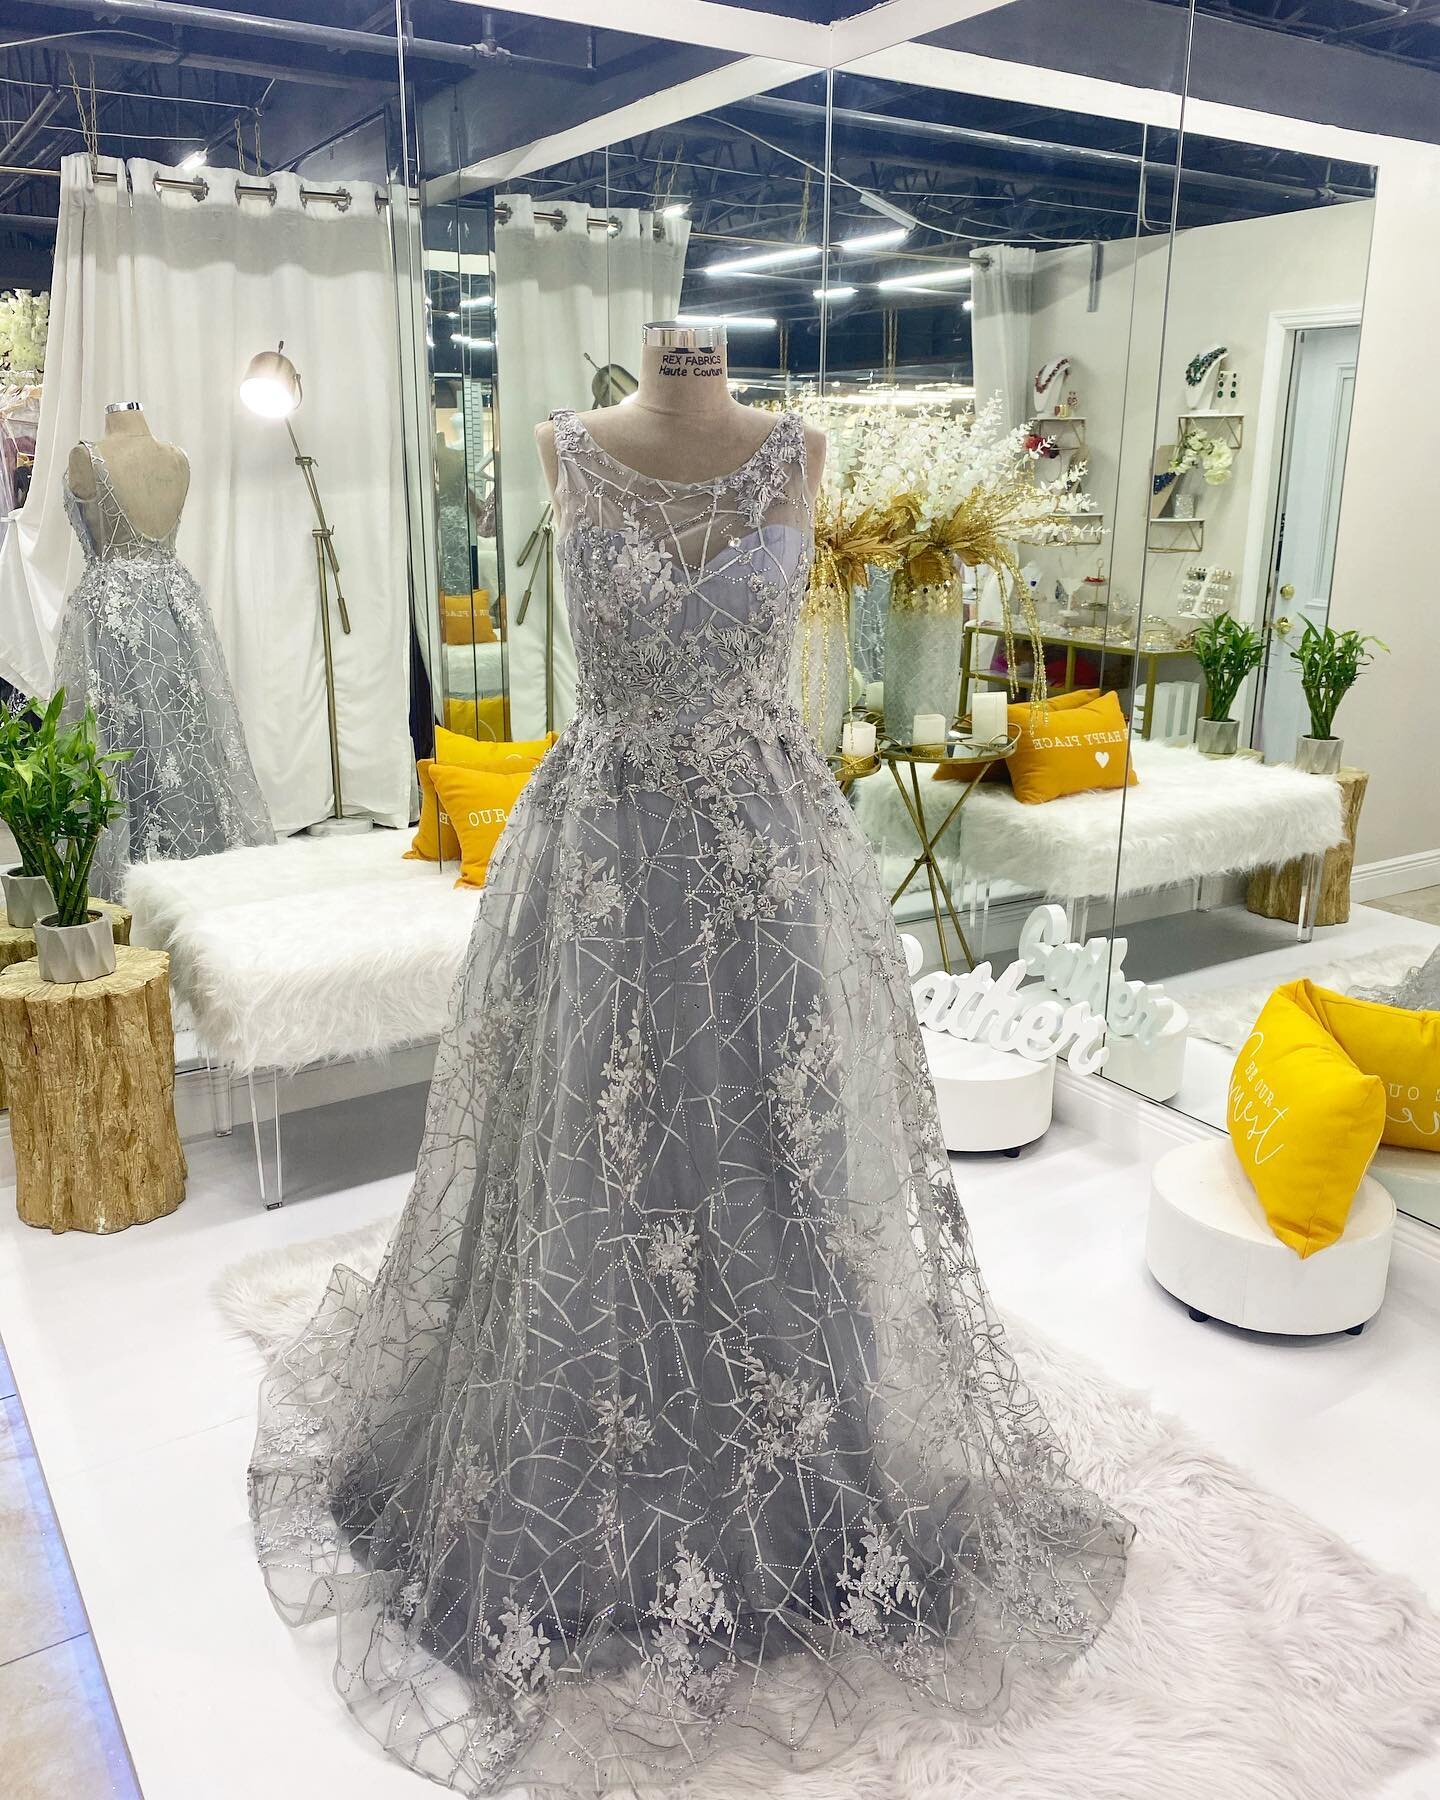 From big and fabulous to simple and beautiful details, we have a dress for a all🥰
&bull;
&bull;
&bull;
&bull;

#quince#quinceañeramiami #quinceañera #quincedress #miami#miamidresses #miamidressrental#southflorida #dresses #gowns #dressrental #quin